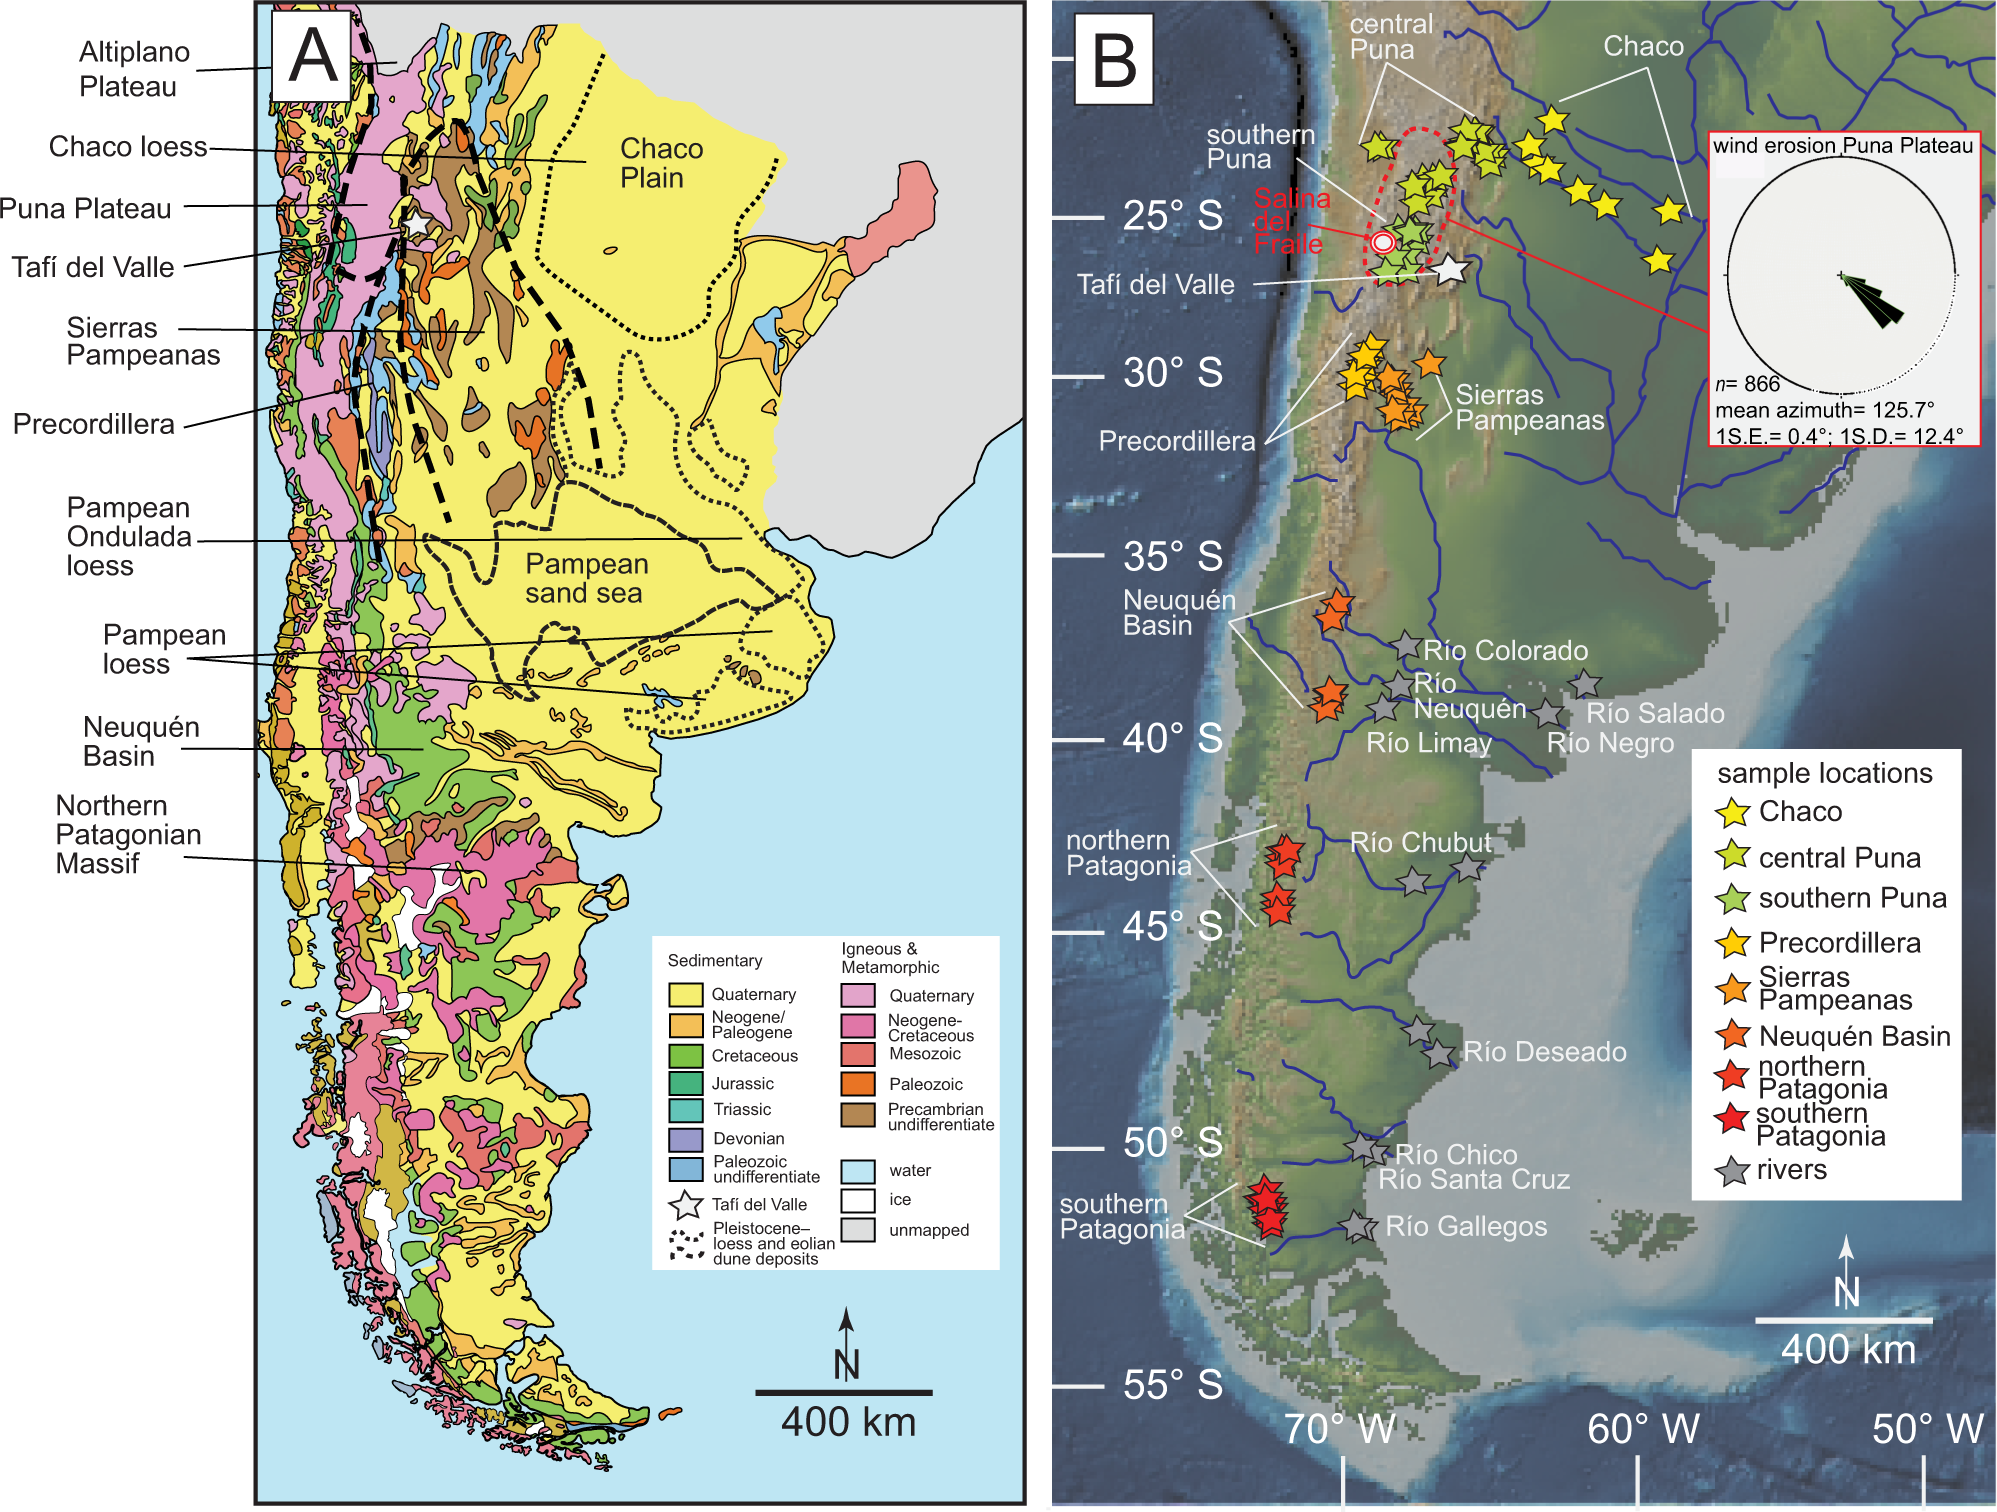 A westerly wind dominated Puna Plateau during deposition of upper  Pleistocene loessic sediments in the subtropical Andes, South America